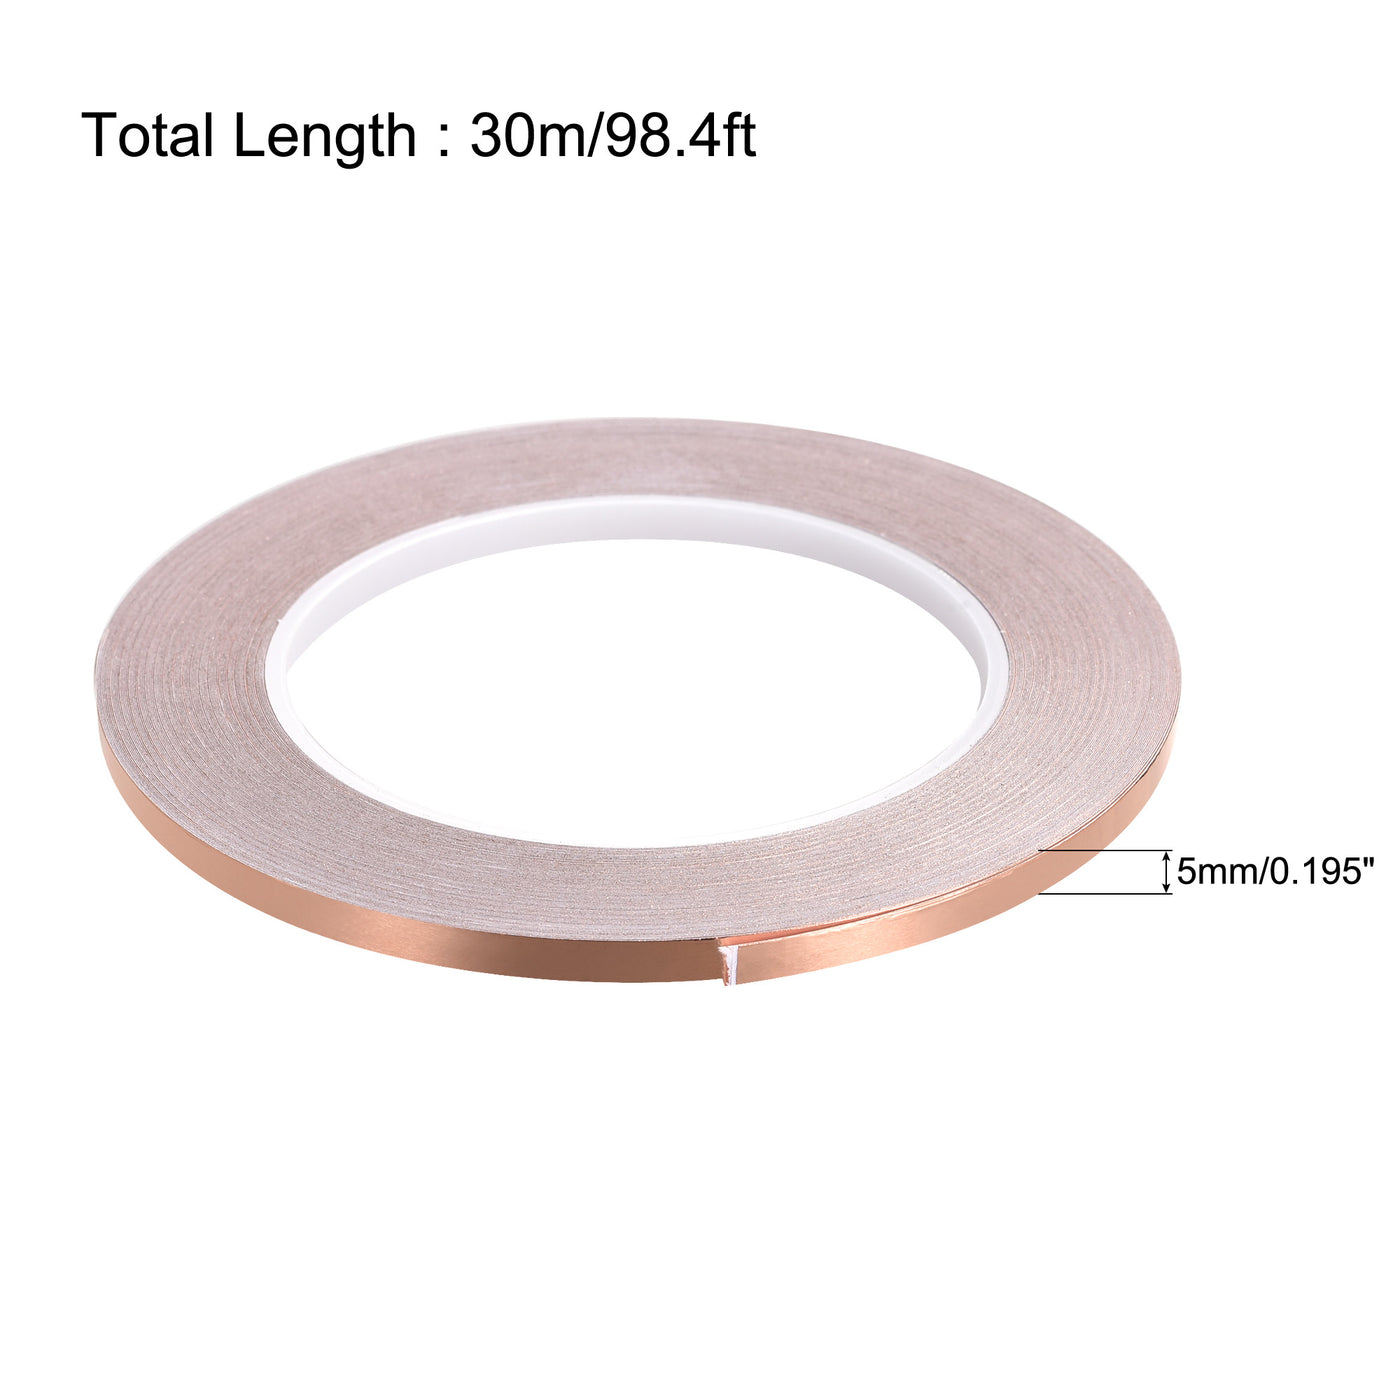 uxcell Uxcell Single-Sided Conductive Tape Copper Foil Tape 5mm x 30m/98.4ft 1pcs